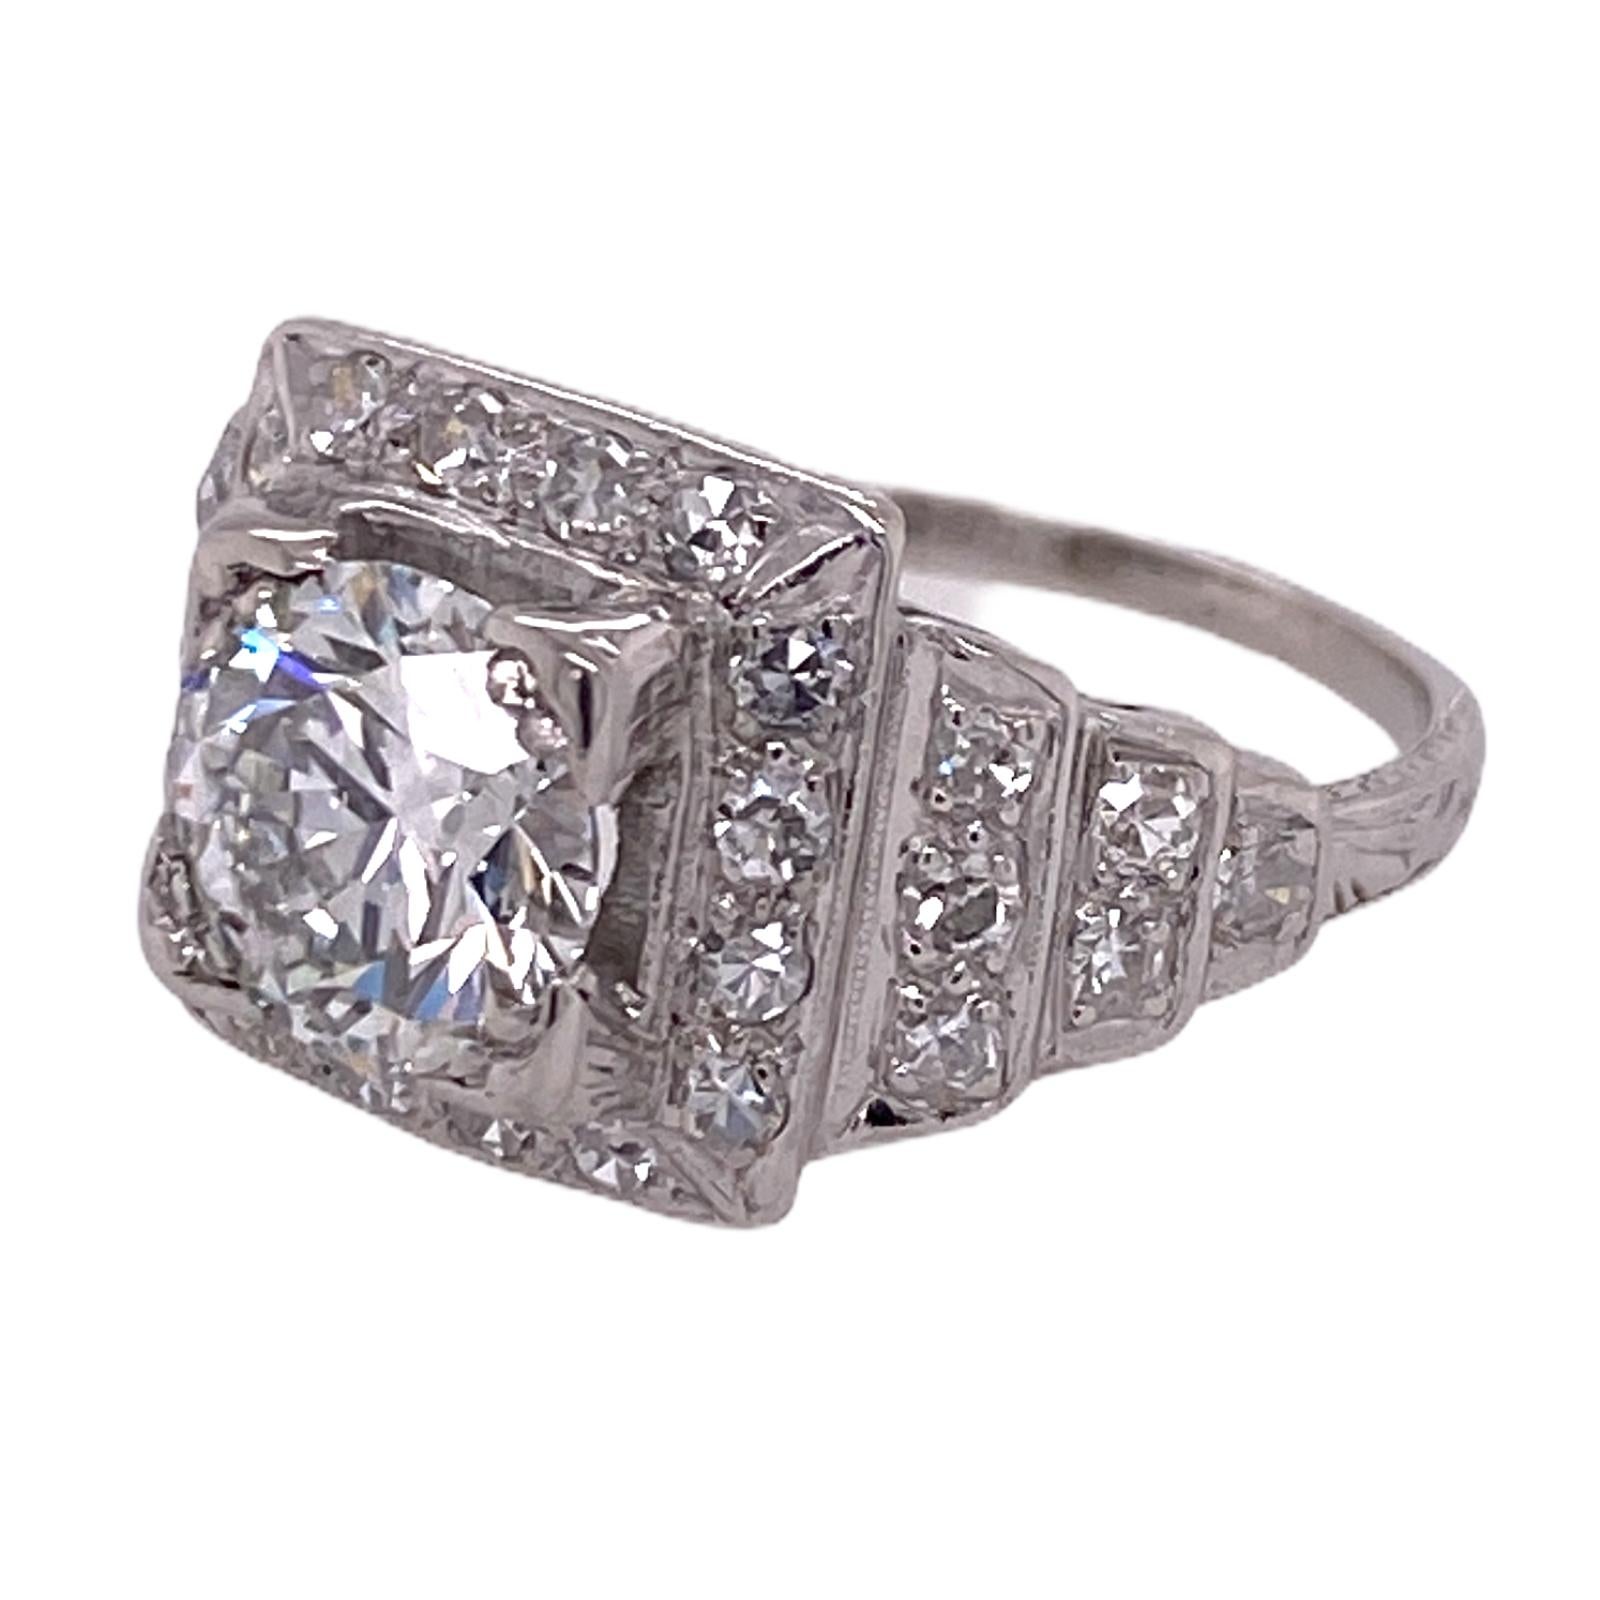 Gorgeous Art Deco diamond engagement ring handmade in platinum. The center Old European cut diamond weighs 1.36 carats and is graded J color and SI1 clarity by the GIA. The Art Deco mounting features 28 single cut diamonds weighing approximately